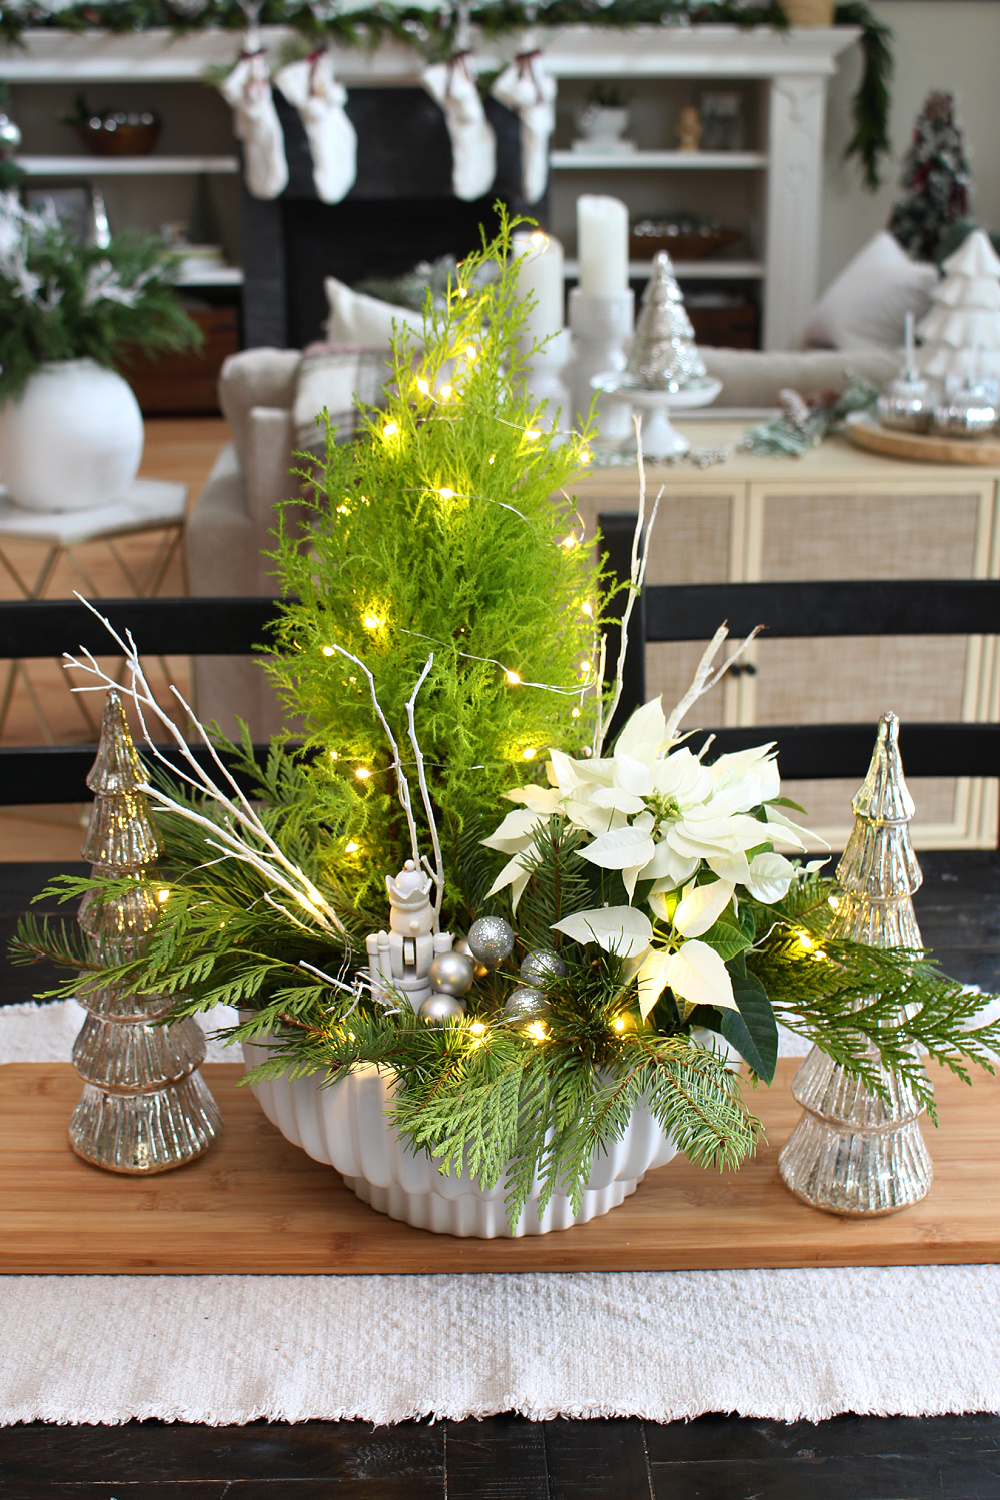 Fresh greenery Christmas centerpiece using a lemon cypress and poinsettia. Embellished with twinkle lights and a nutcracker. #Christmascenterpiece #centerpieceideas #Christmasdecor #Christmascrafts #ChristmasDIY